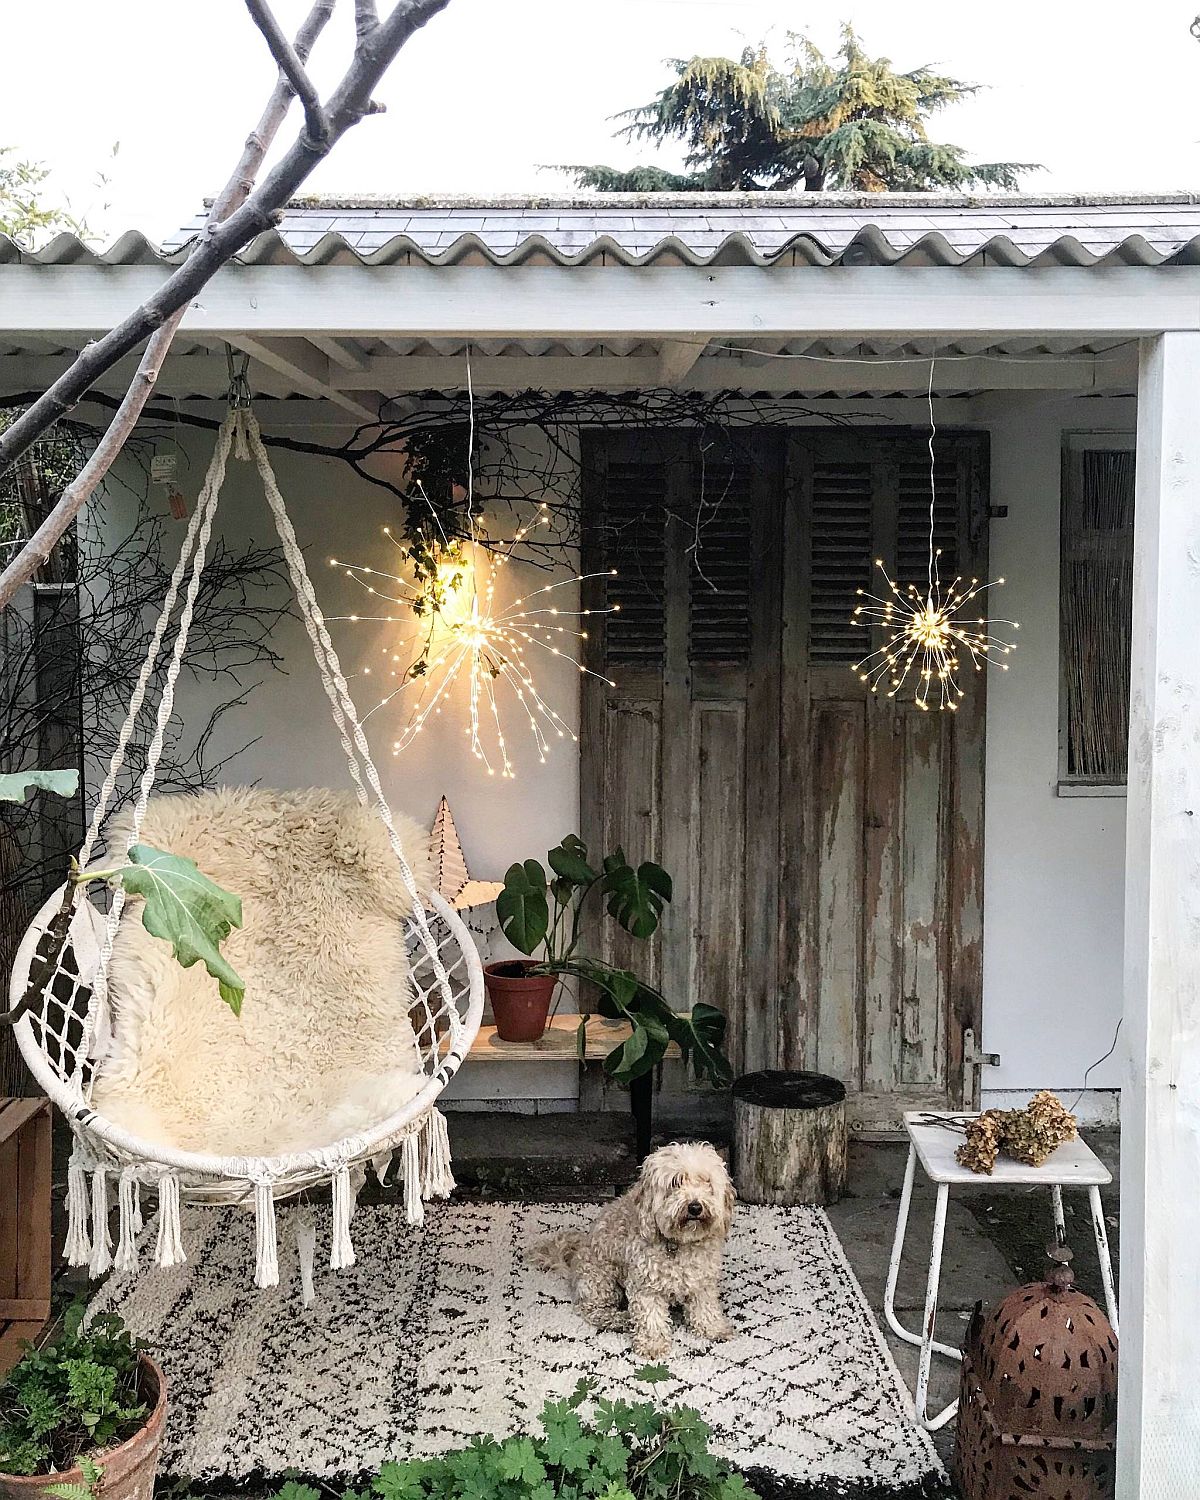 An eclectic mix of decor coupled with greenery creates this relaxing shabby-chic patio